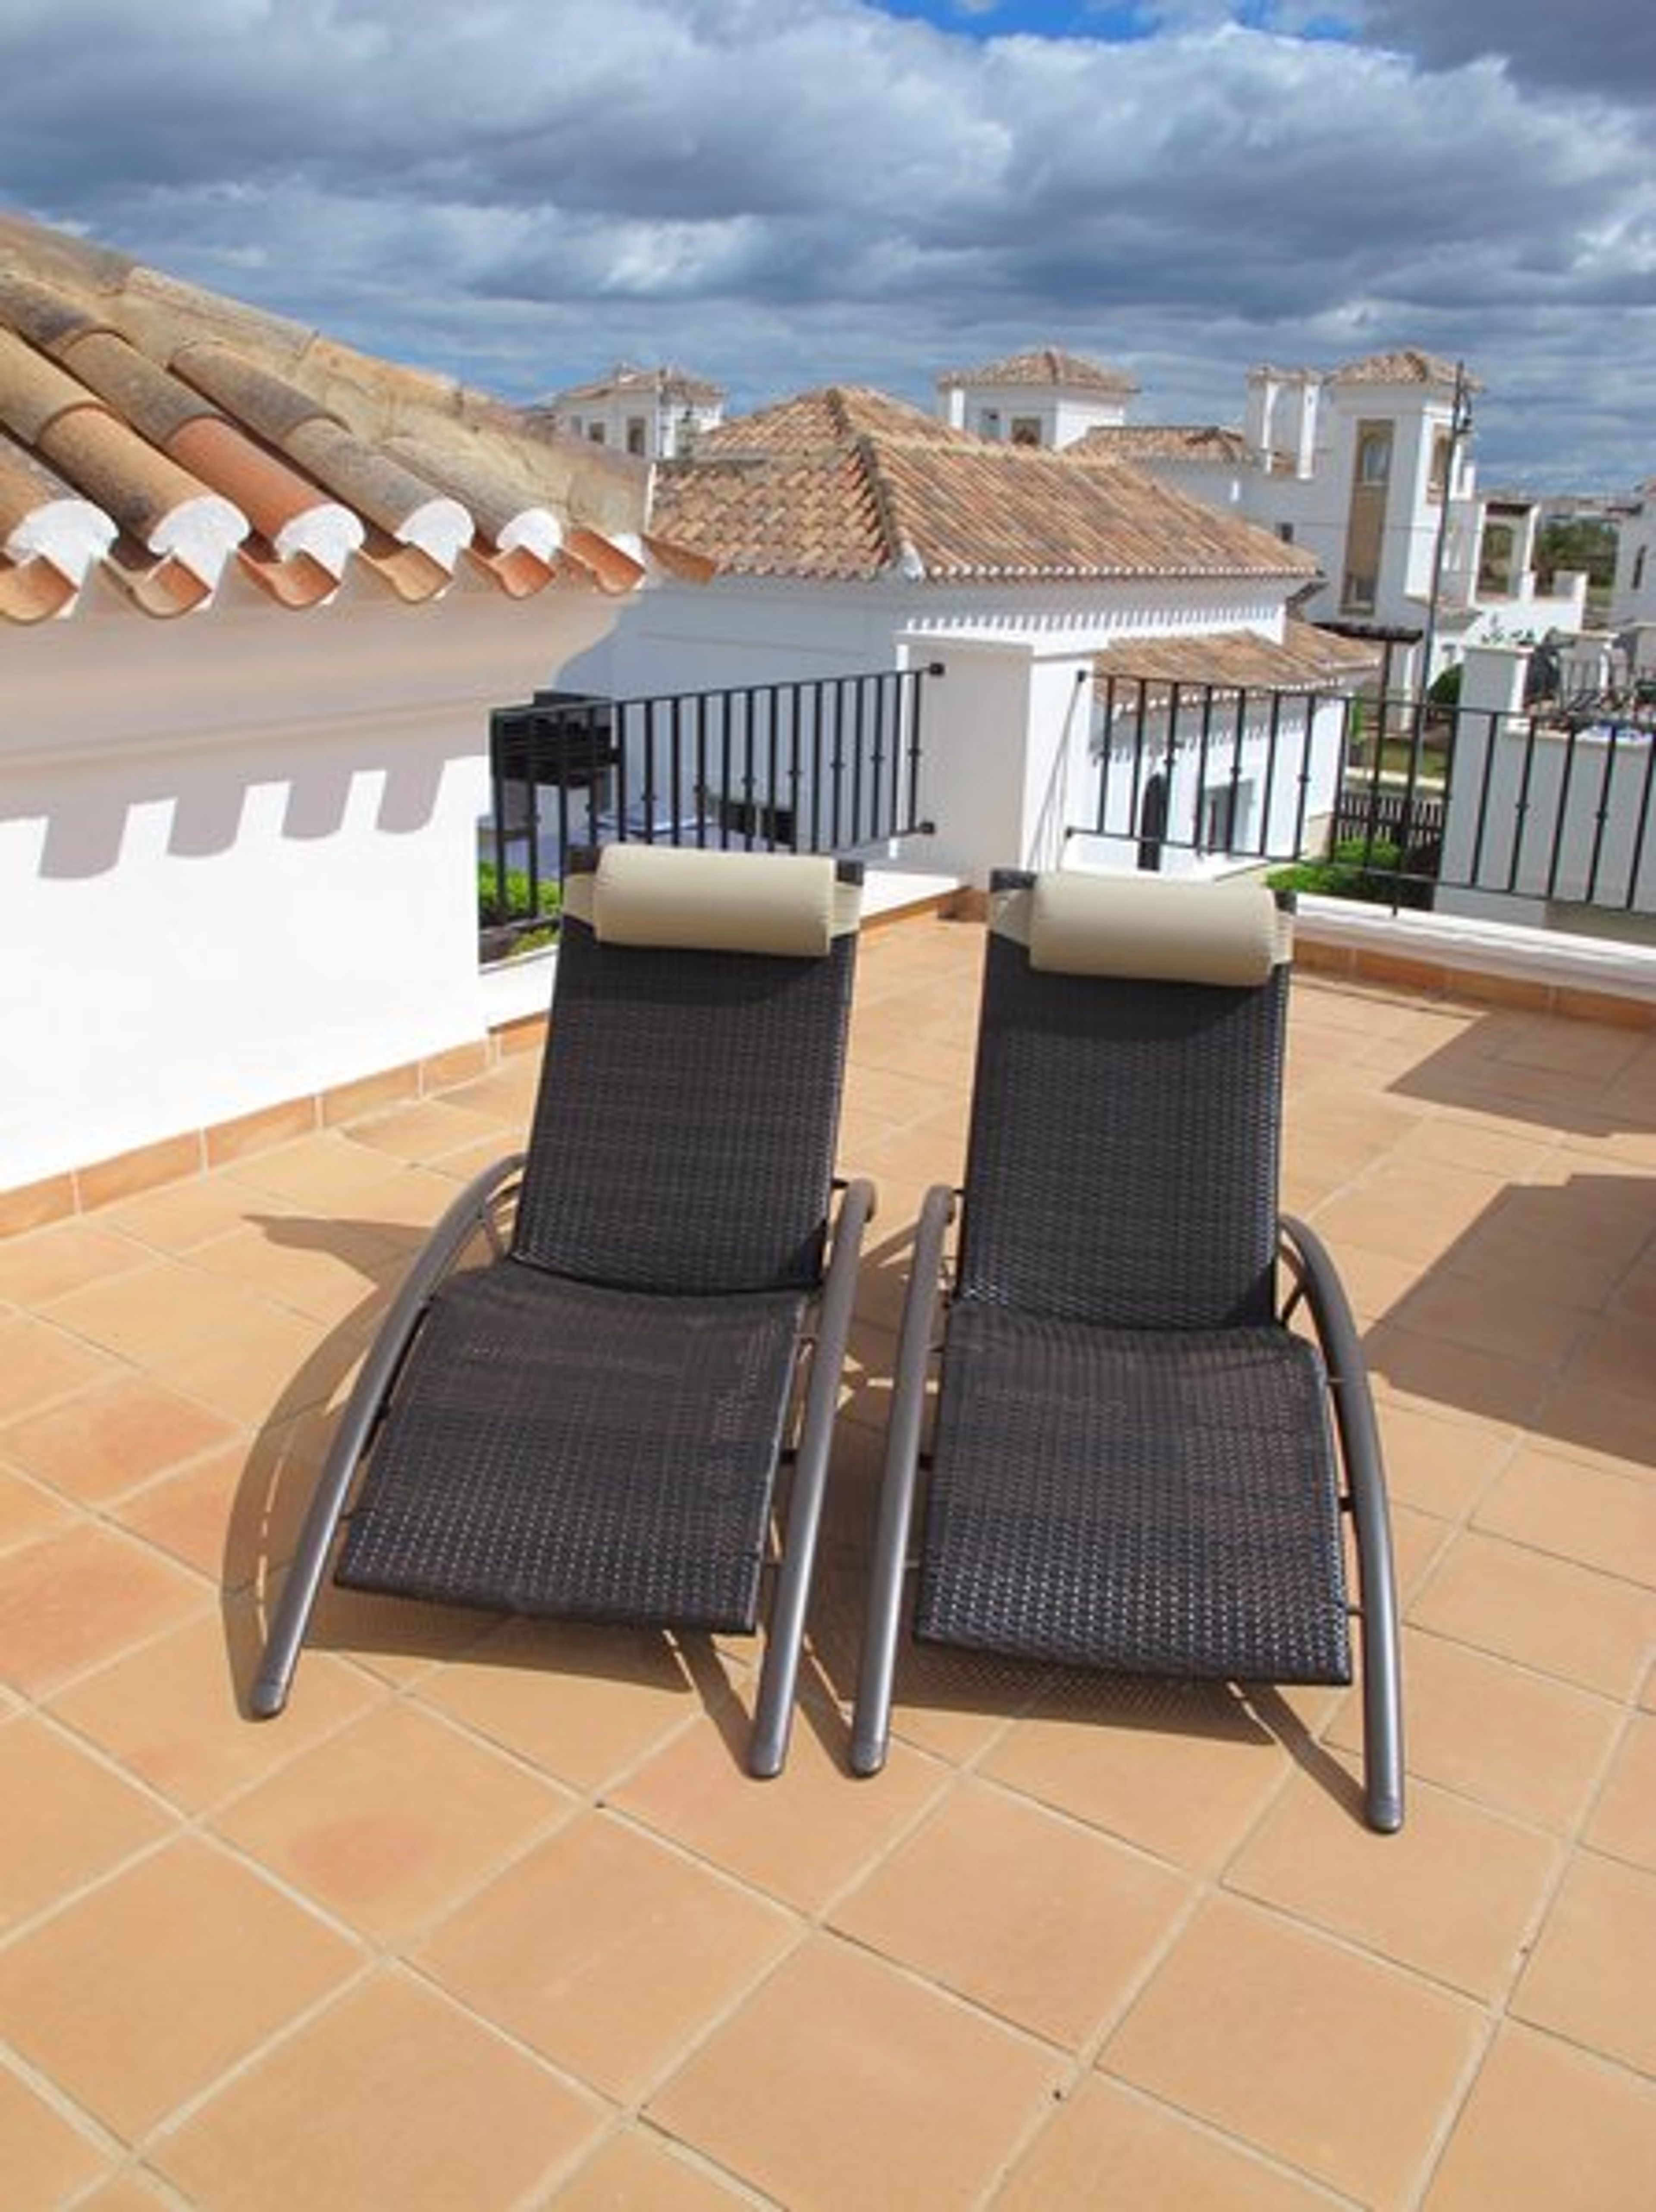 Quality sun loungers on the roof terrace for those wanting sun all day